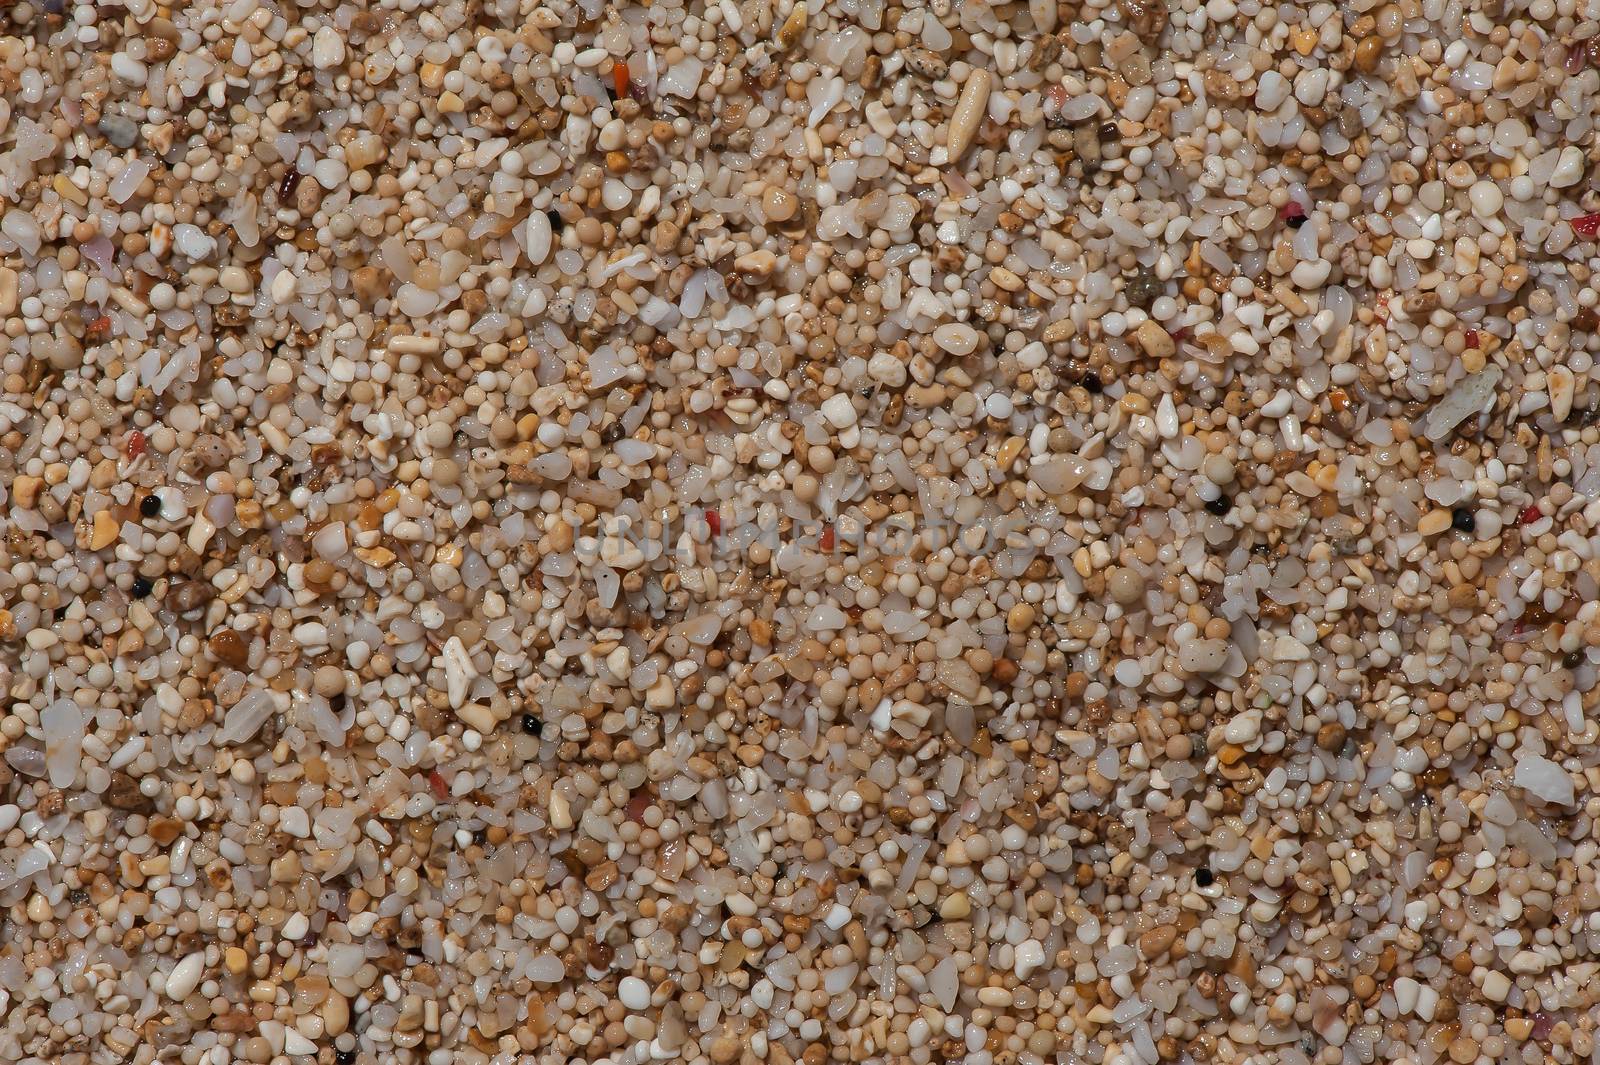 Seaside sand that with close-up view turns out to be a coral and shell flinders processed by the ocean. It creates the conceptual depiction of plurality, multiplicity, complexity and uniqueness. Uluwatu beach, Bali, Indonesia.